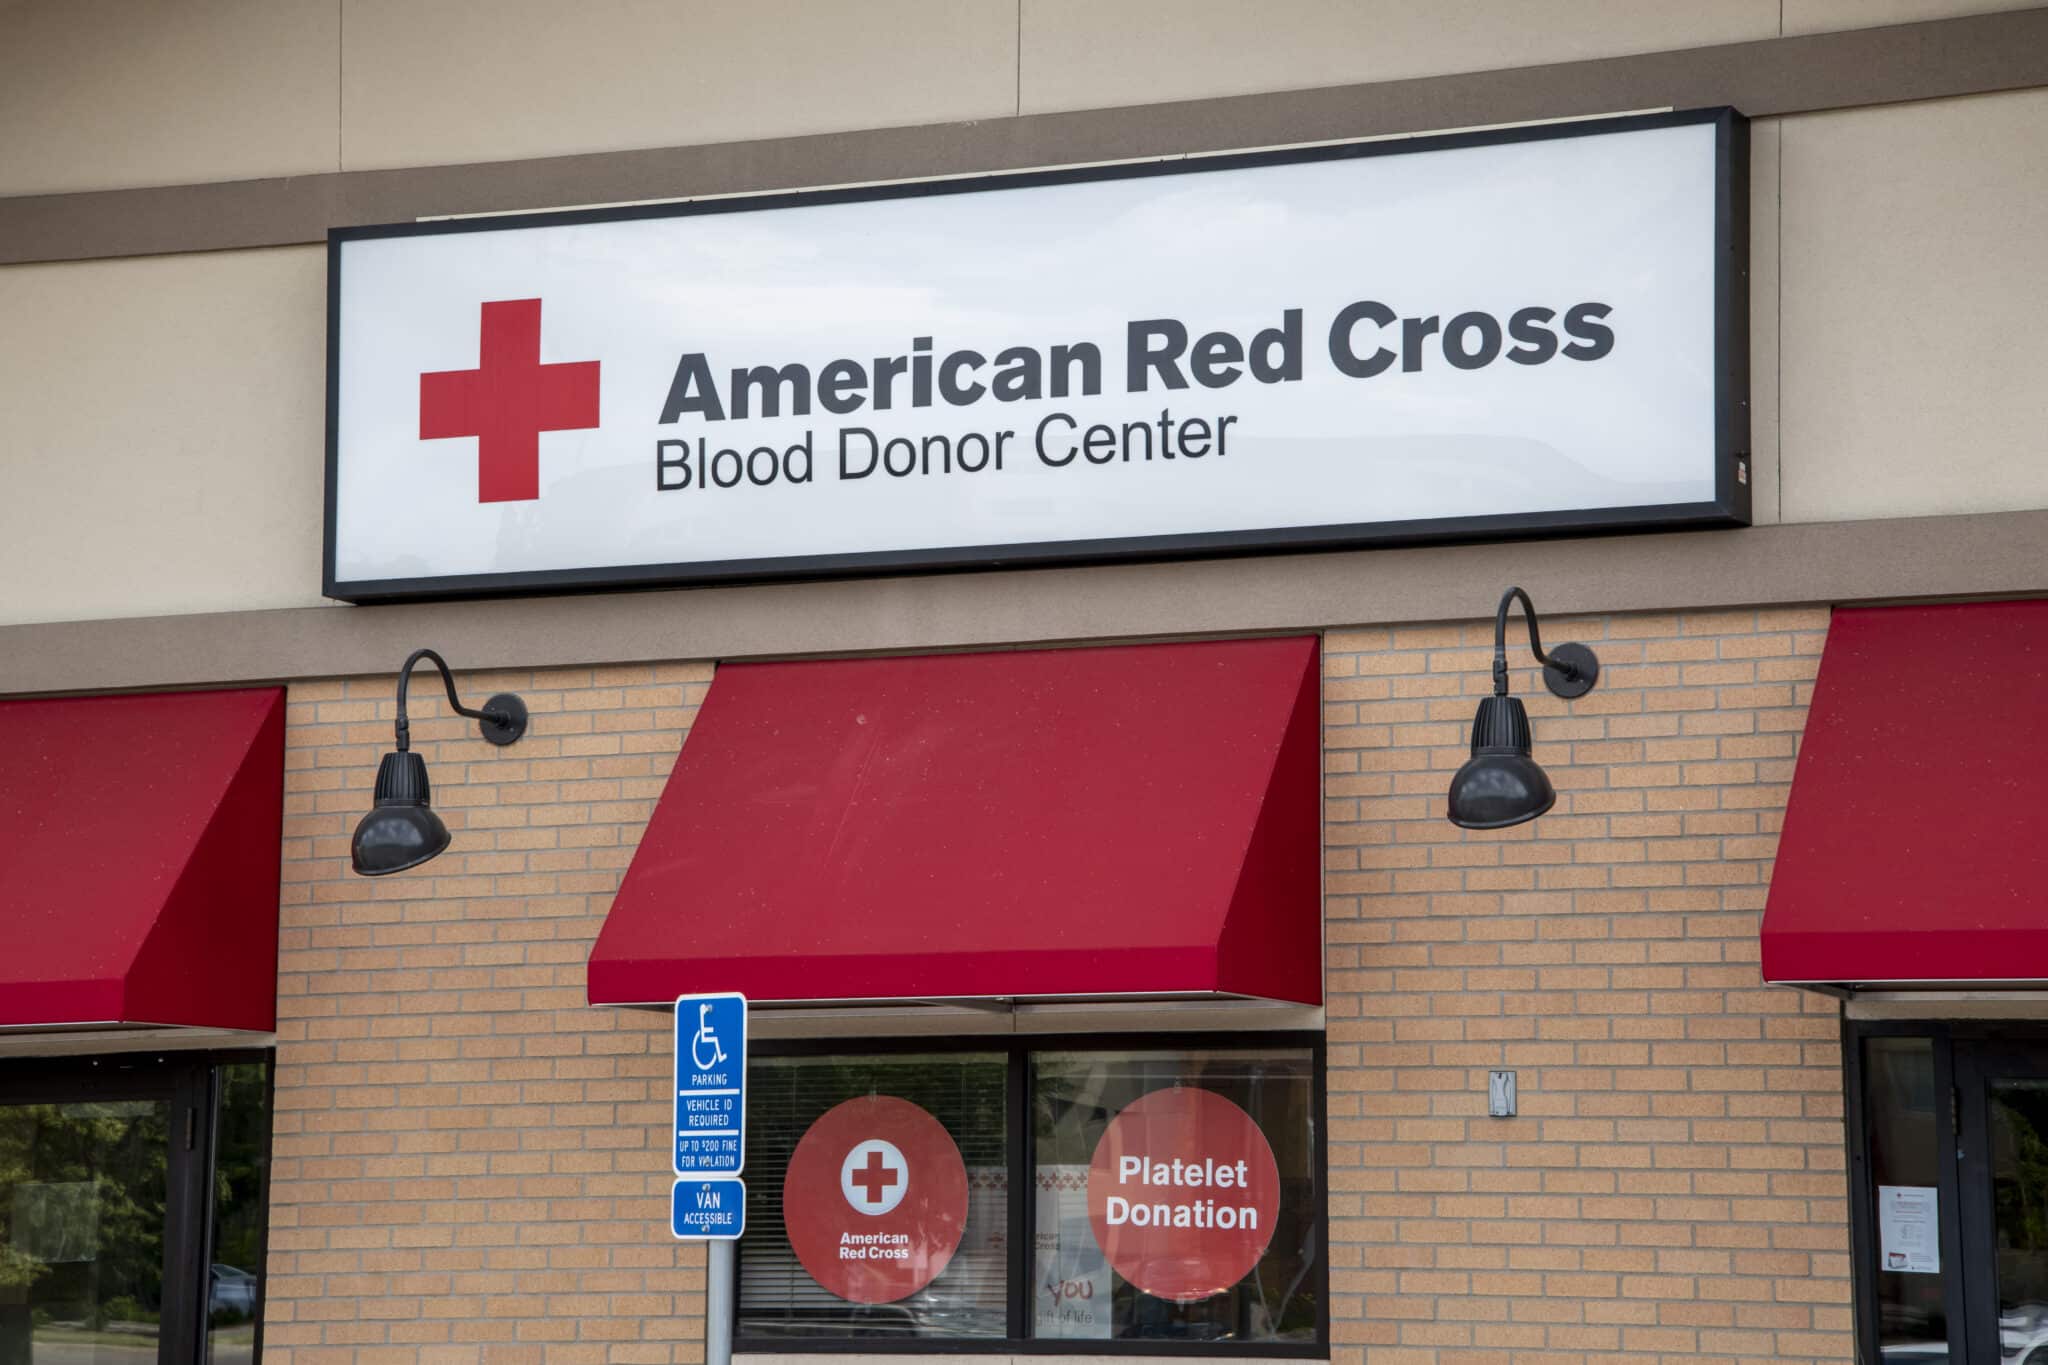 Shoreview, Minnesota. American Red Cross blood donor center. (Photo by: Michael Siluk/UCG/Universal Images Group via Getty Images)